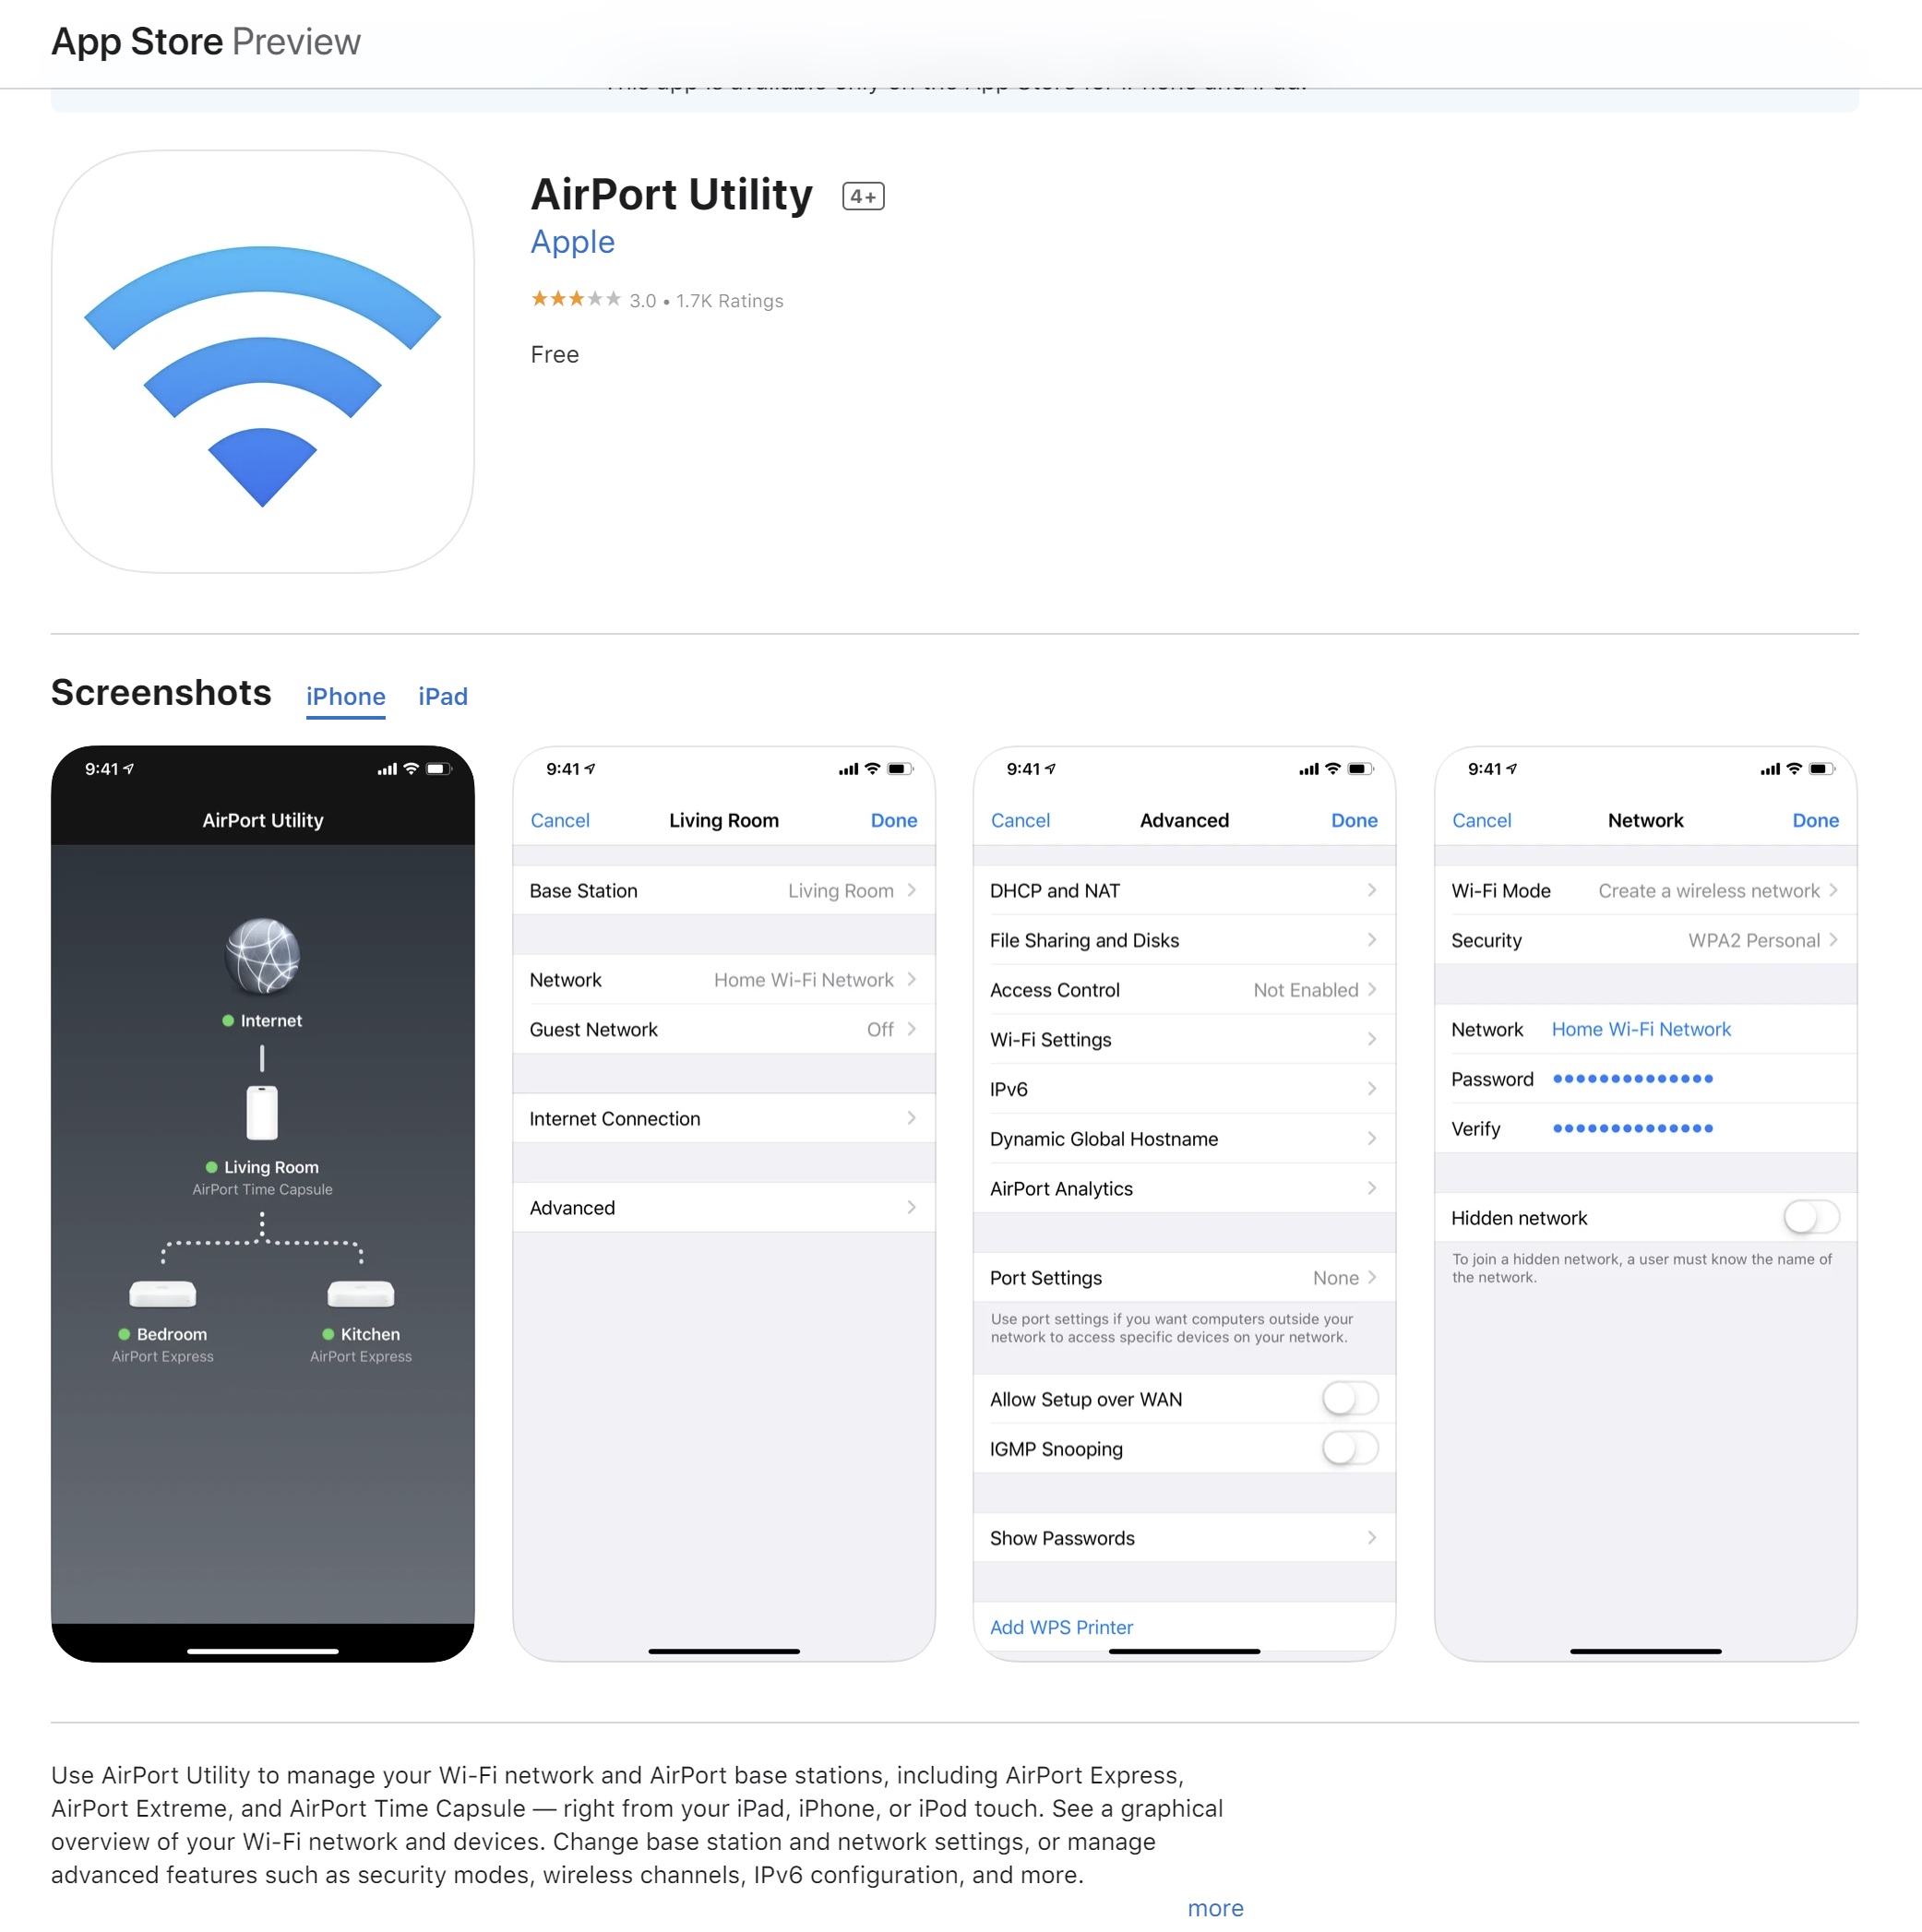 App Store with Airport Utility page